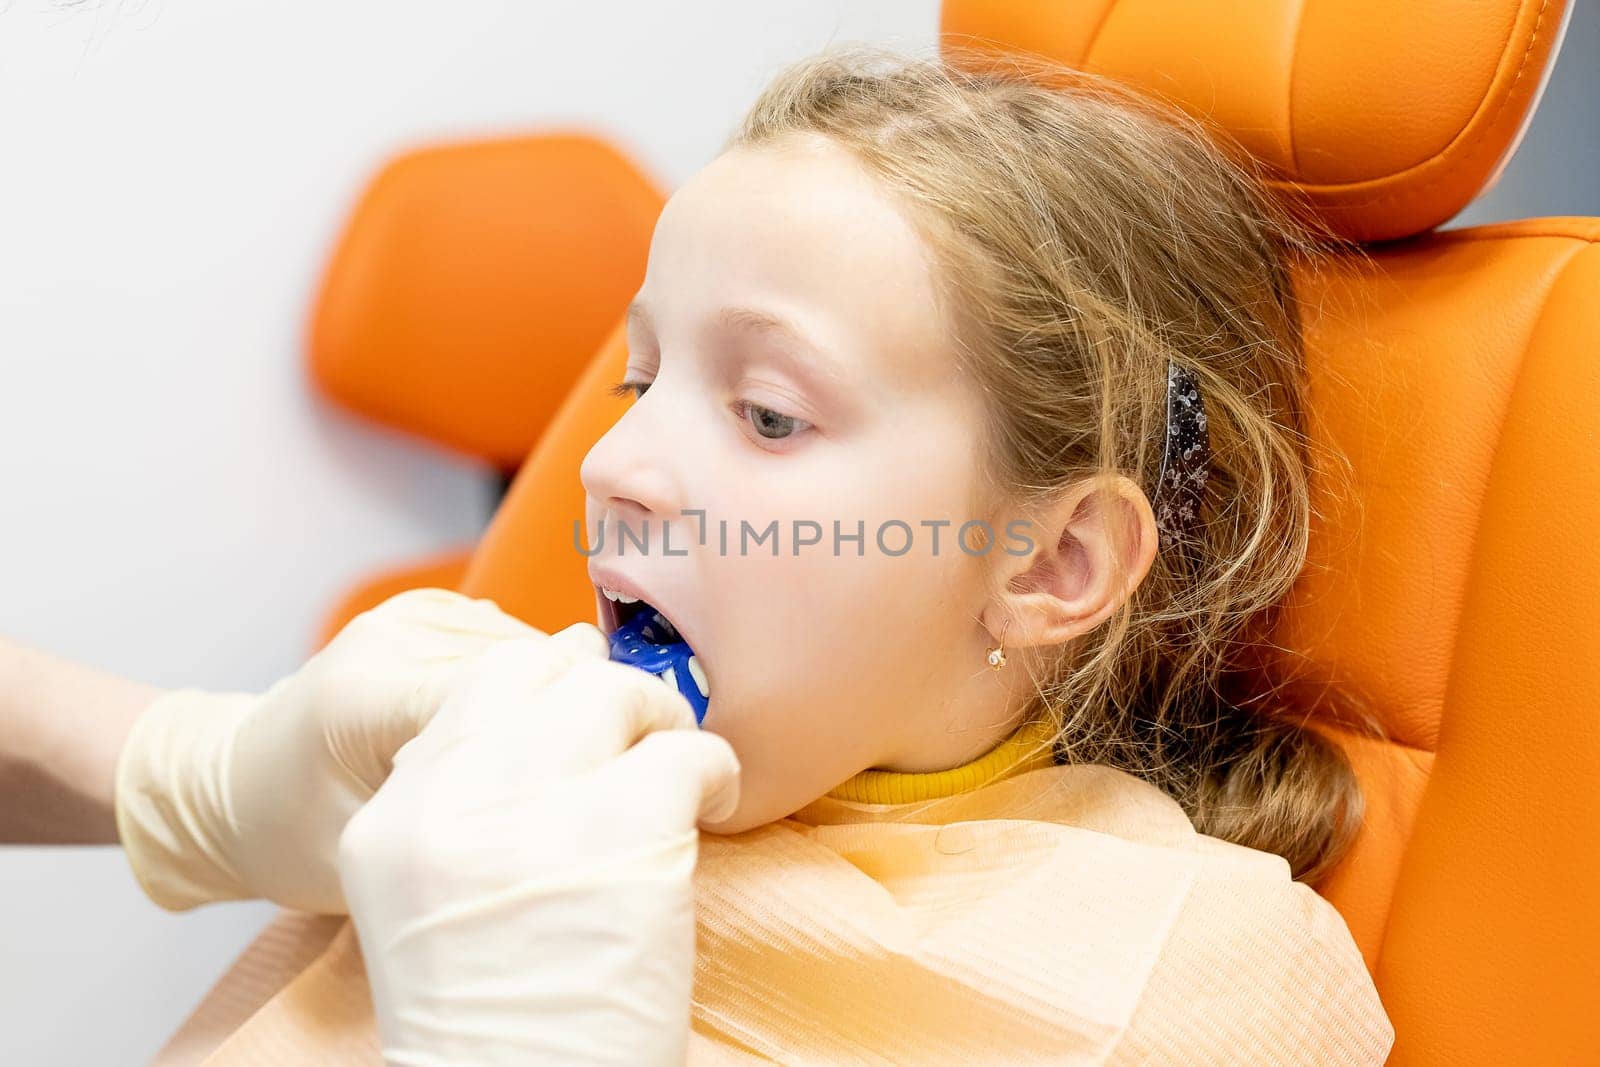 The orthodontist prepares a special paste for making an impression of the patient's teeth.Child during orthodontist visit and oral cavity check-up by YuliaYaspe1979